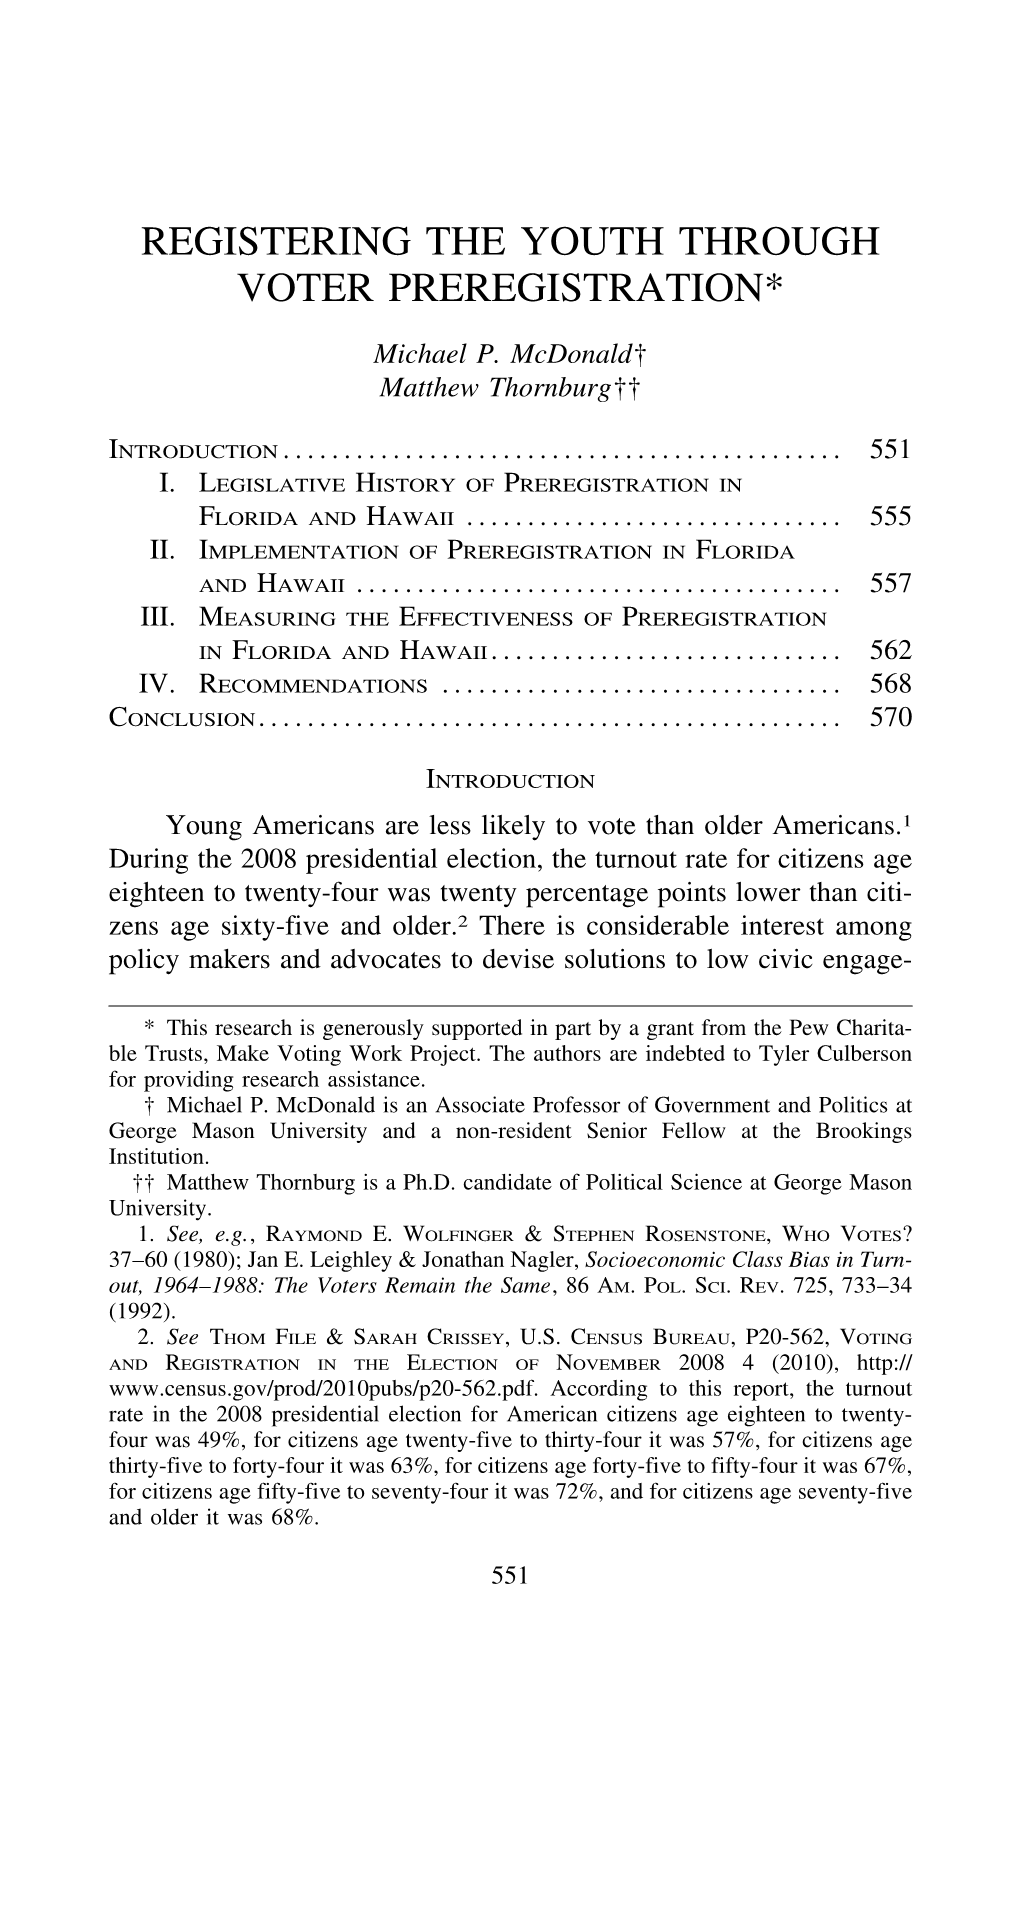 Registering the Youth Through Voter Preregistration.Pdf